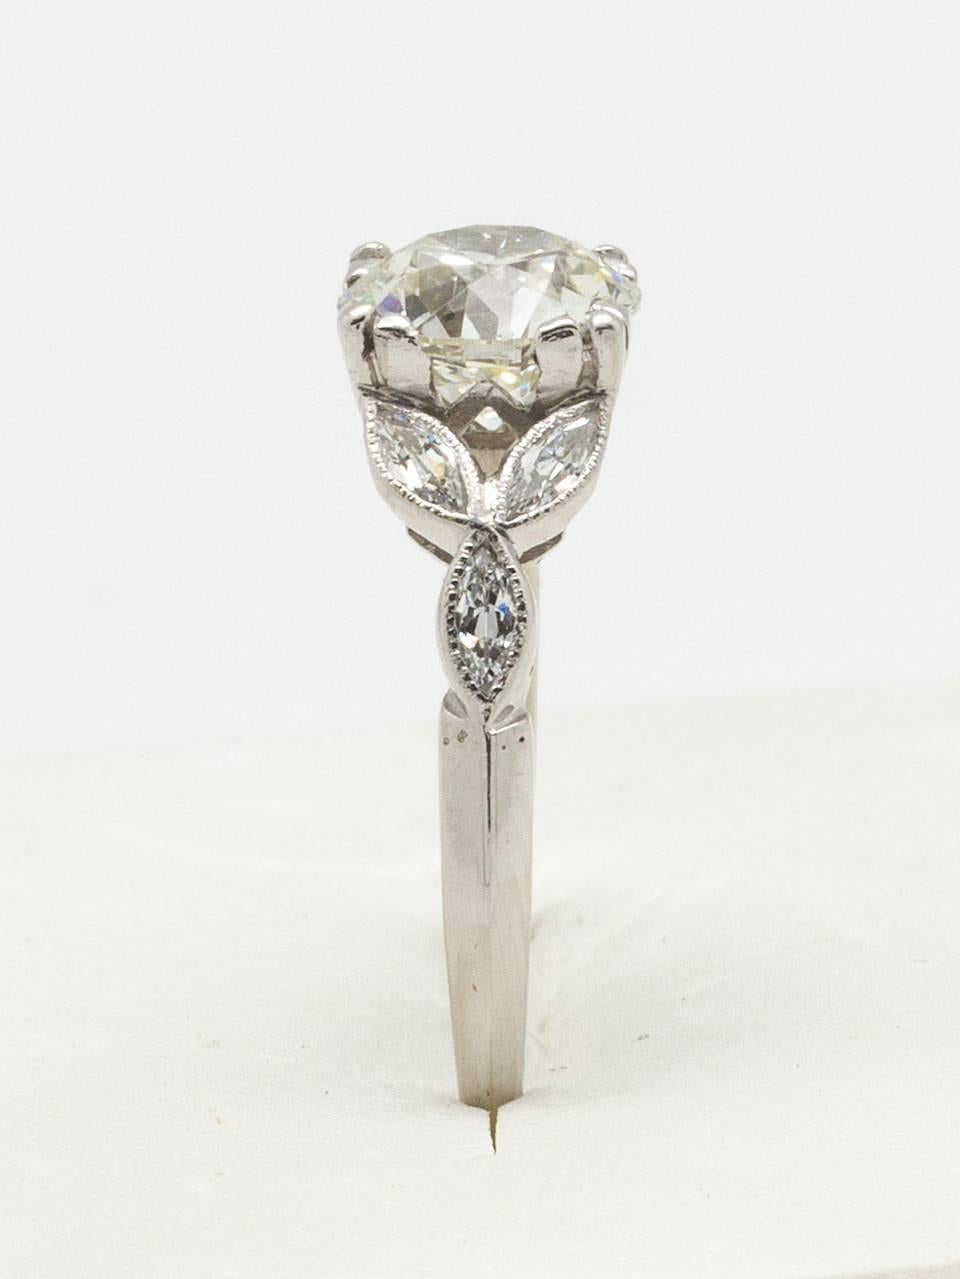 Gorgeous vintage platinum engagement ring featuring a stunning 1.29 carat Old European Cut J/SI1 center diamond flanked by whimsical floral motifs set with three marquise side stones on each side. Top of ring measures 7mm, tapering to a 1mm narrow